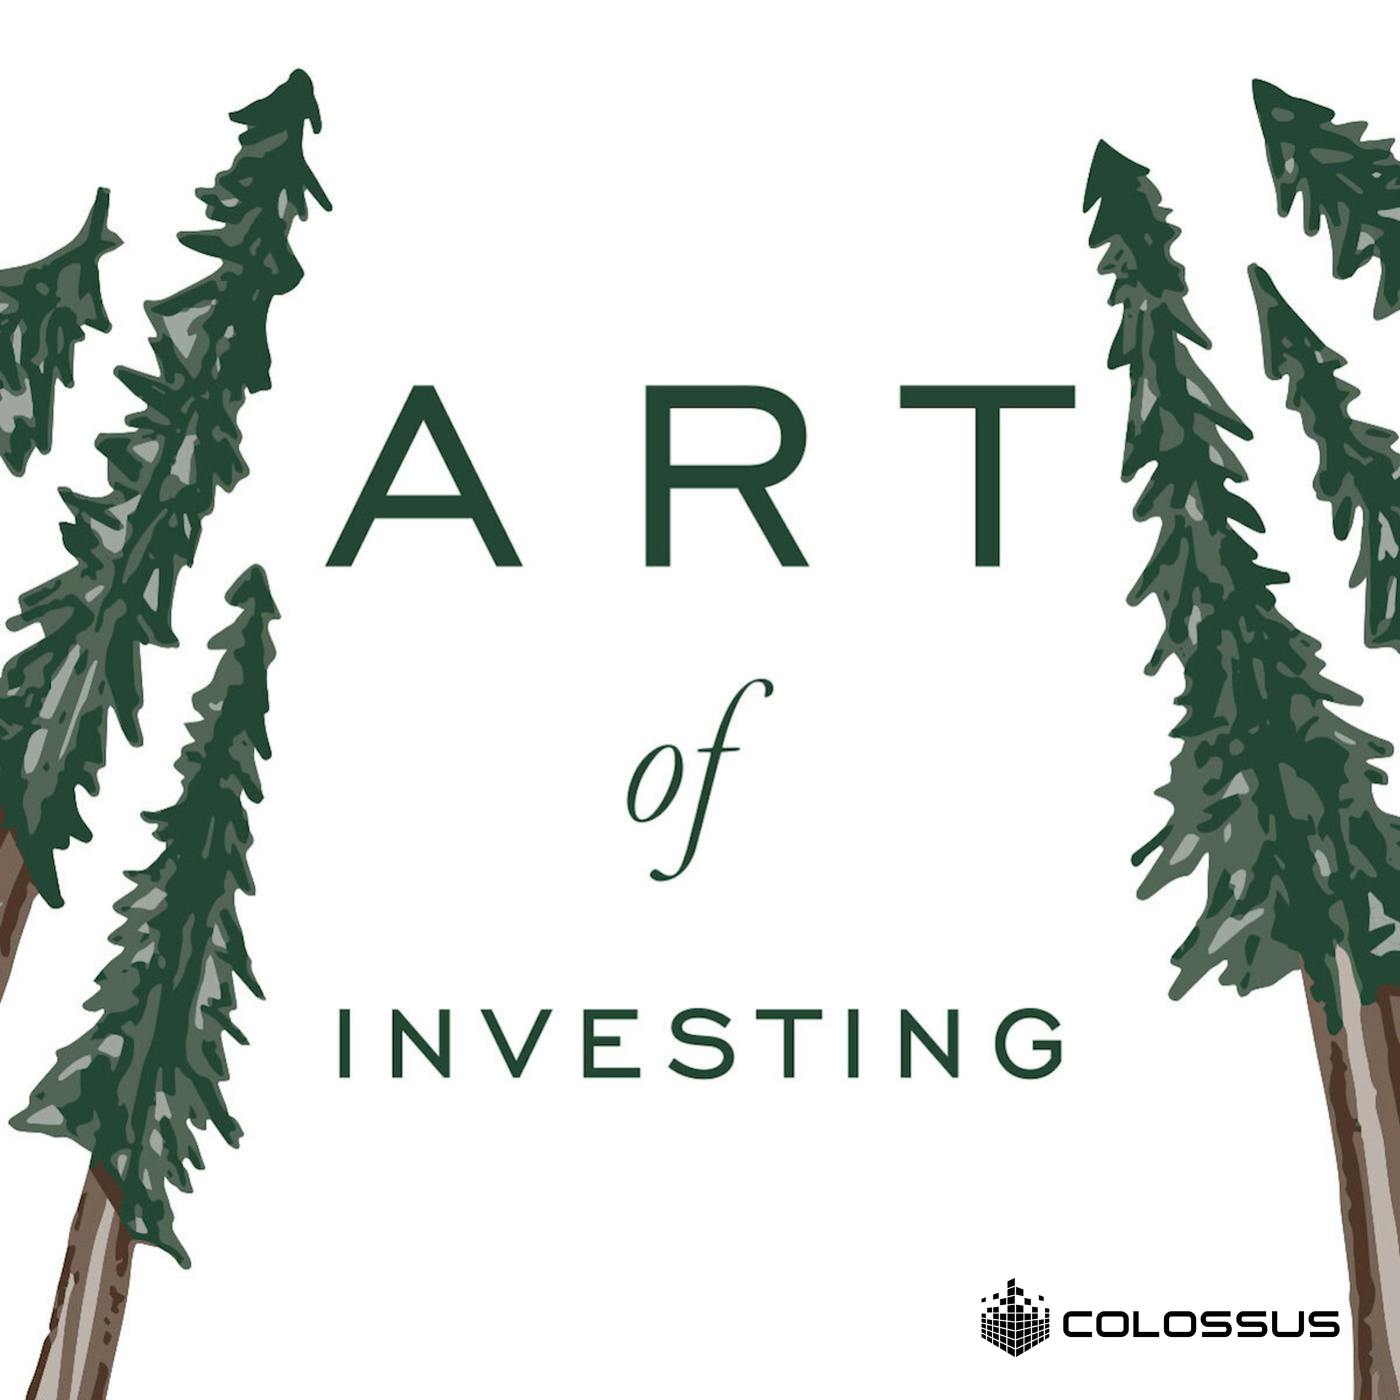 Welcome to Art of Investing